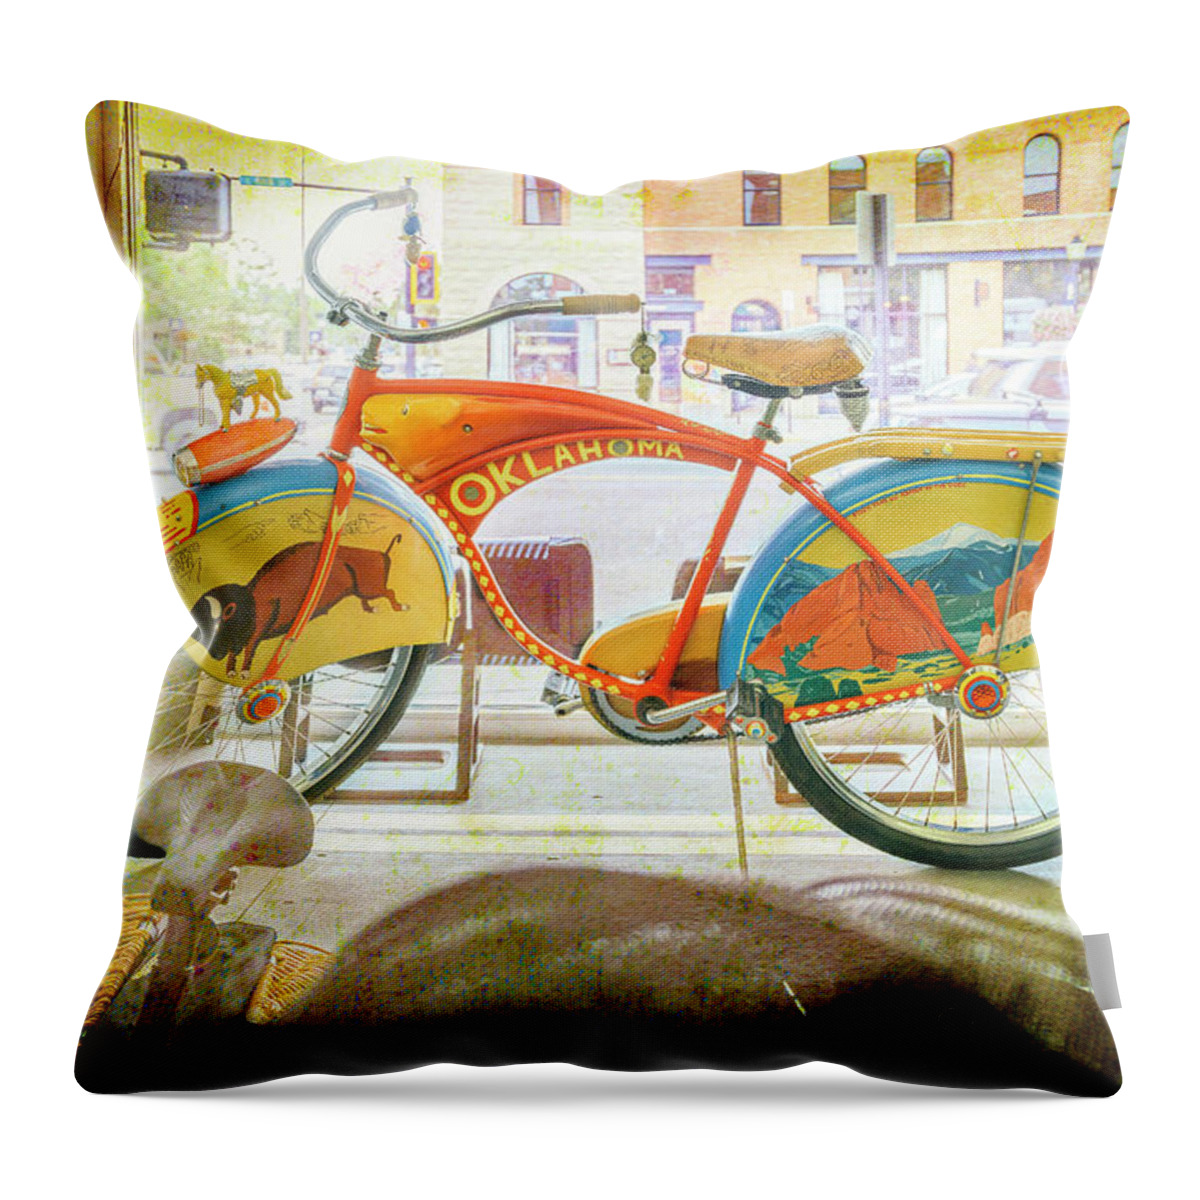 Bicycle Throw Pillow featuring the photograph Oklahoma Bicycle by Craig J Satterlee